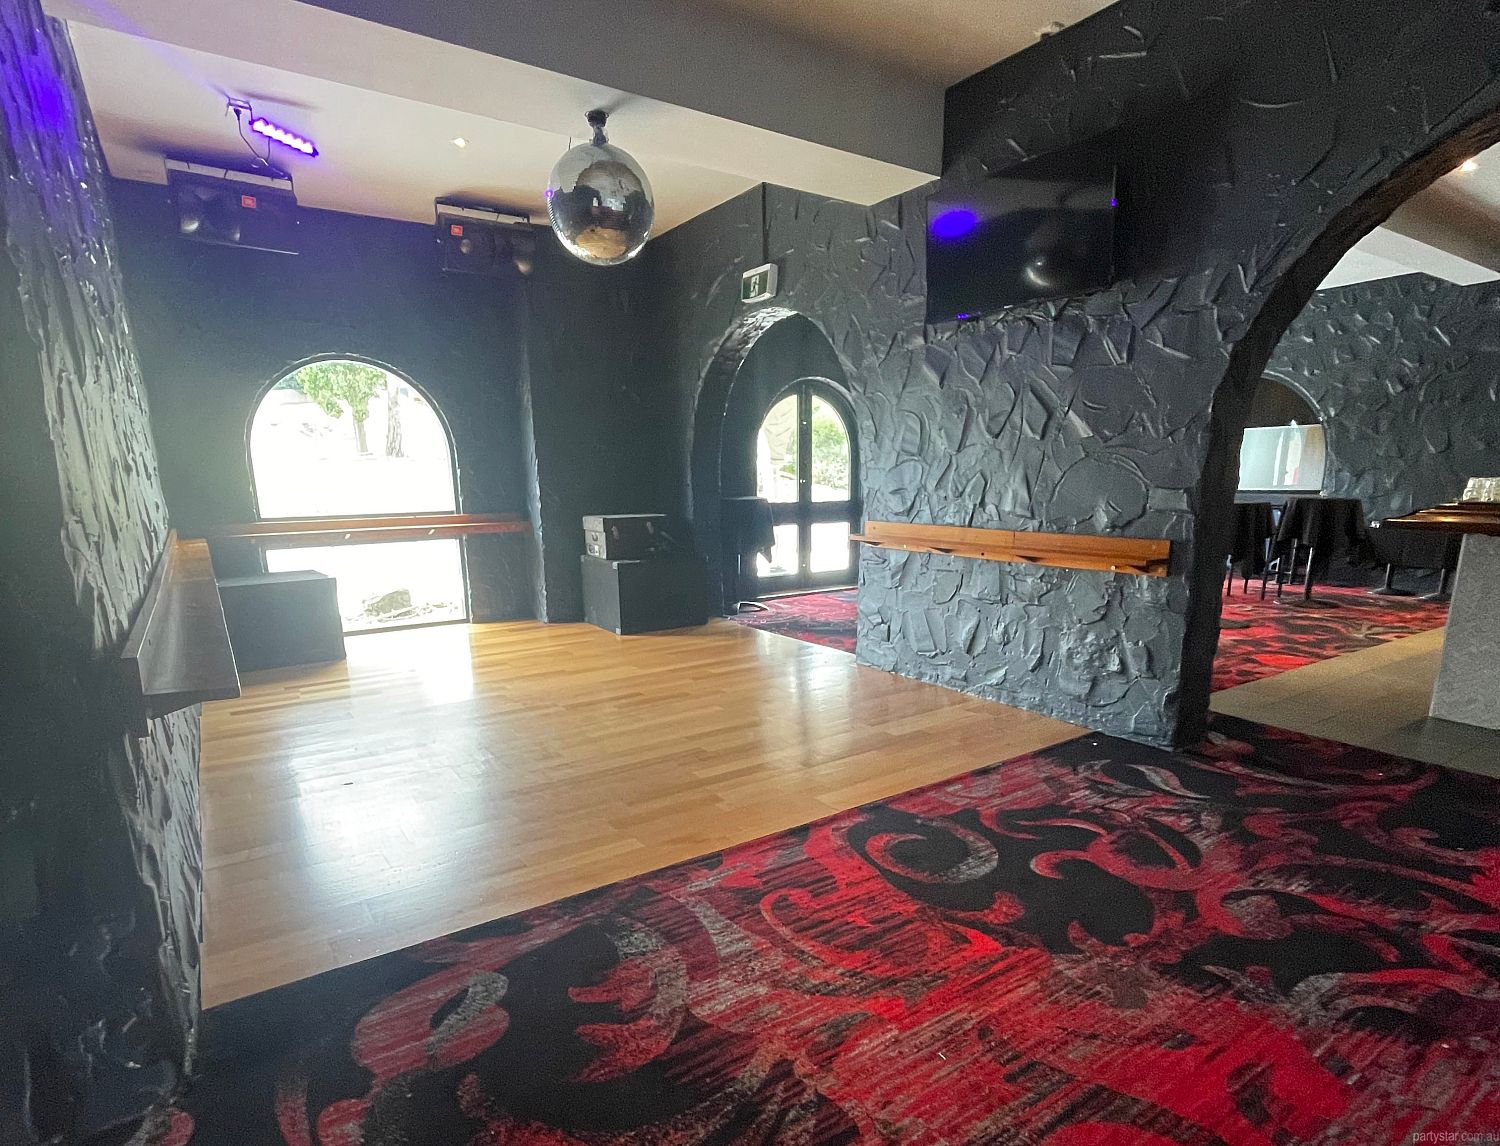 Ferntree Gully Hotel, Ferntree Gully, VIC. Function Room hire photo #2